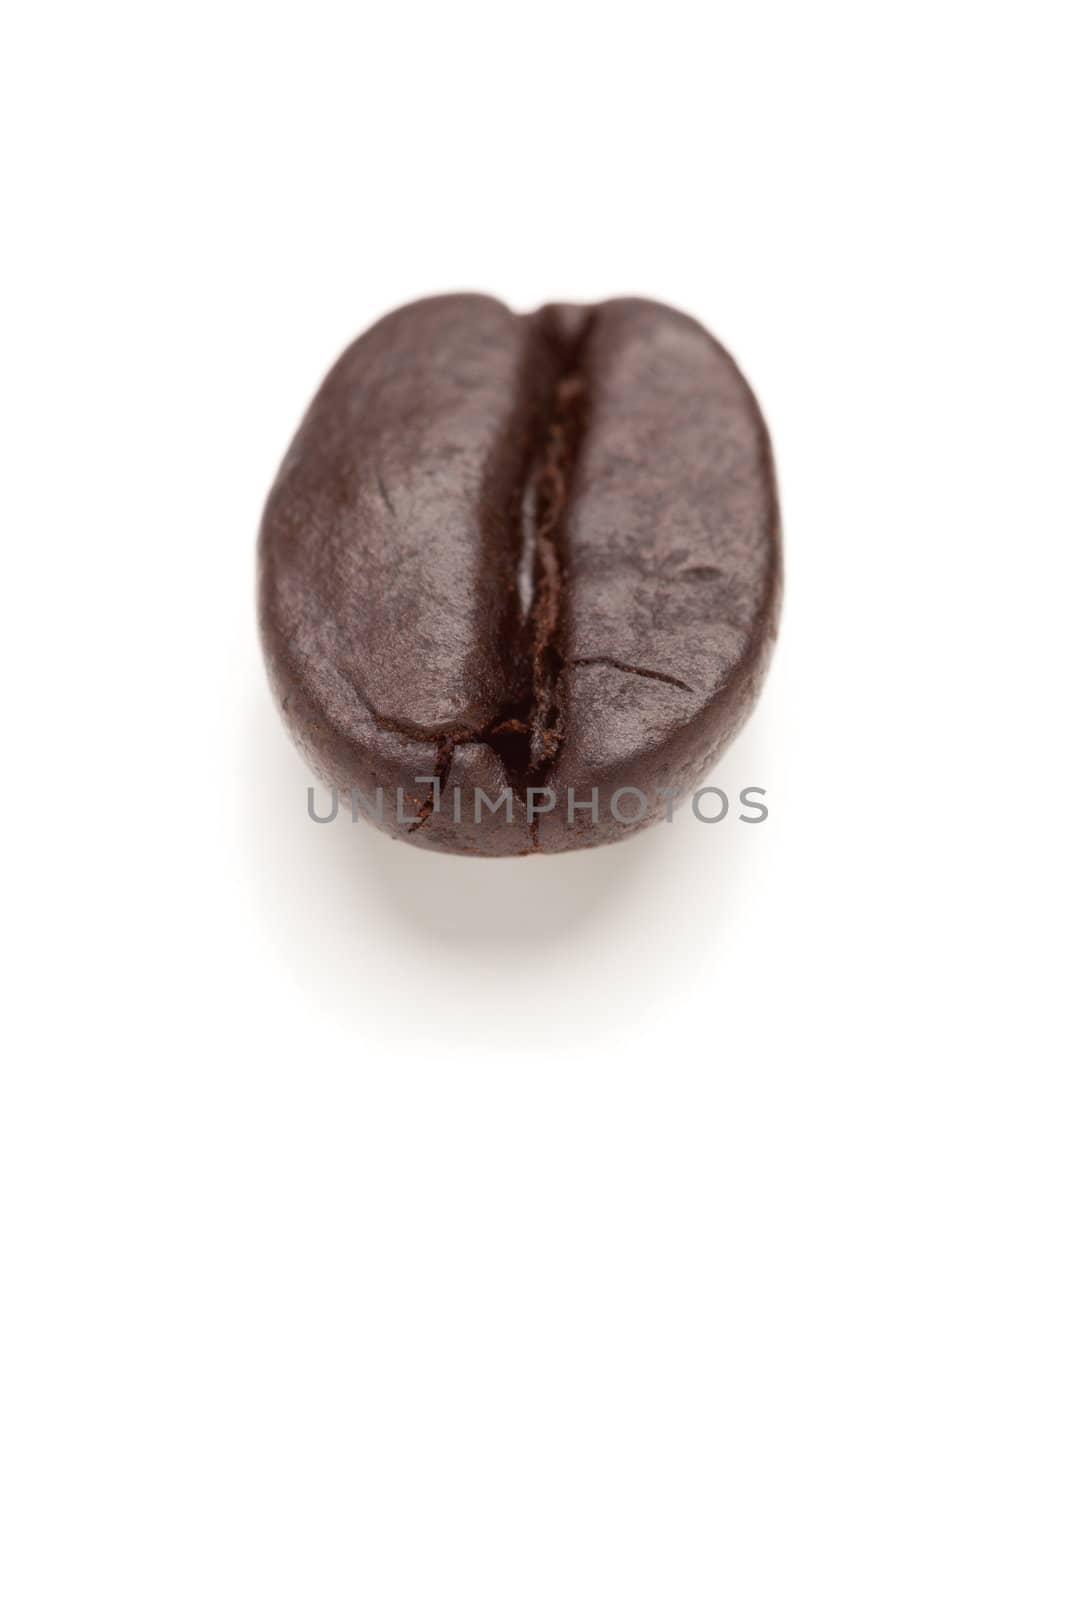 Single Roasted Coffee Bean on White by Feverpitched